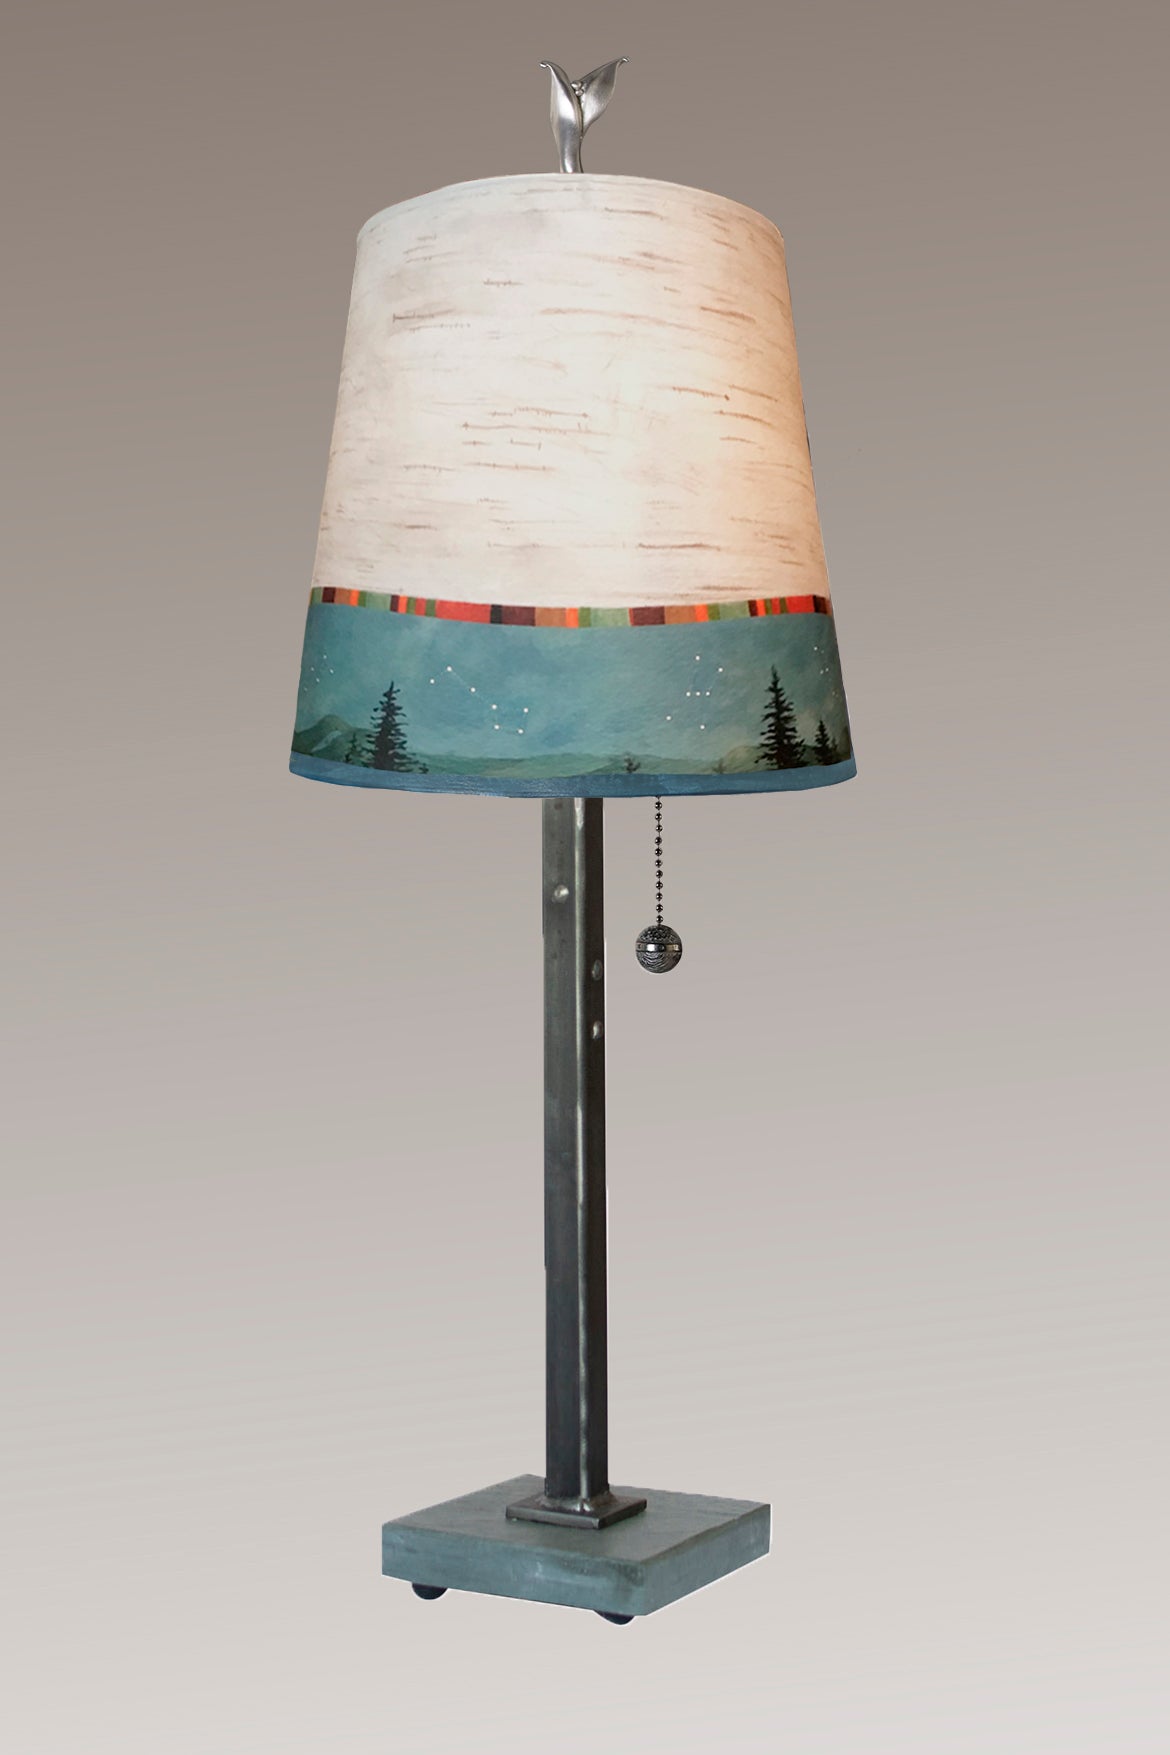 Janna Ugone & Co Table Lamps Steel Table Lamp with Small Drum Shade in Birch Midnight